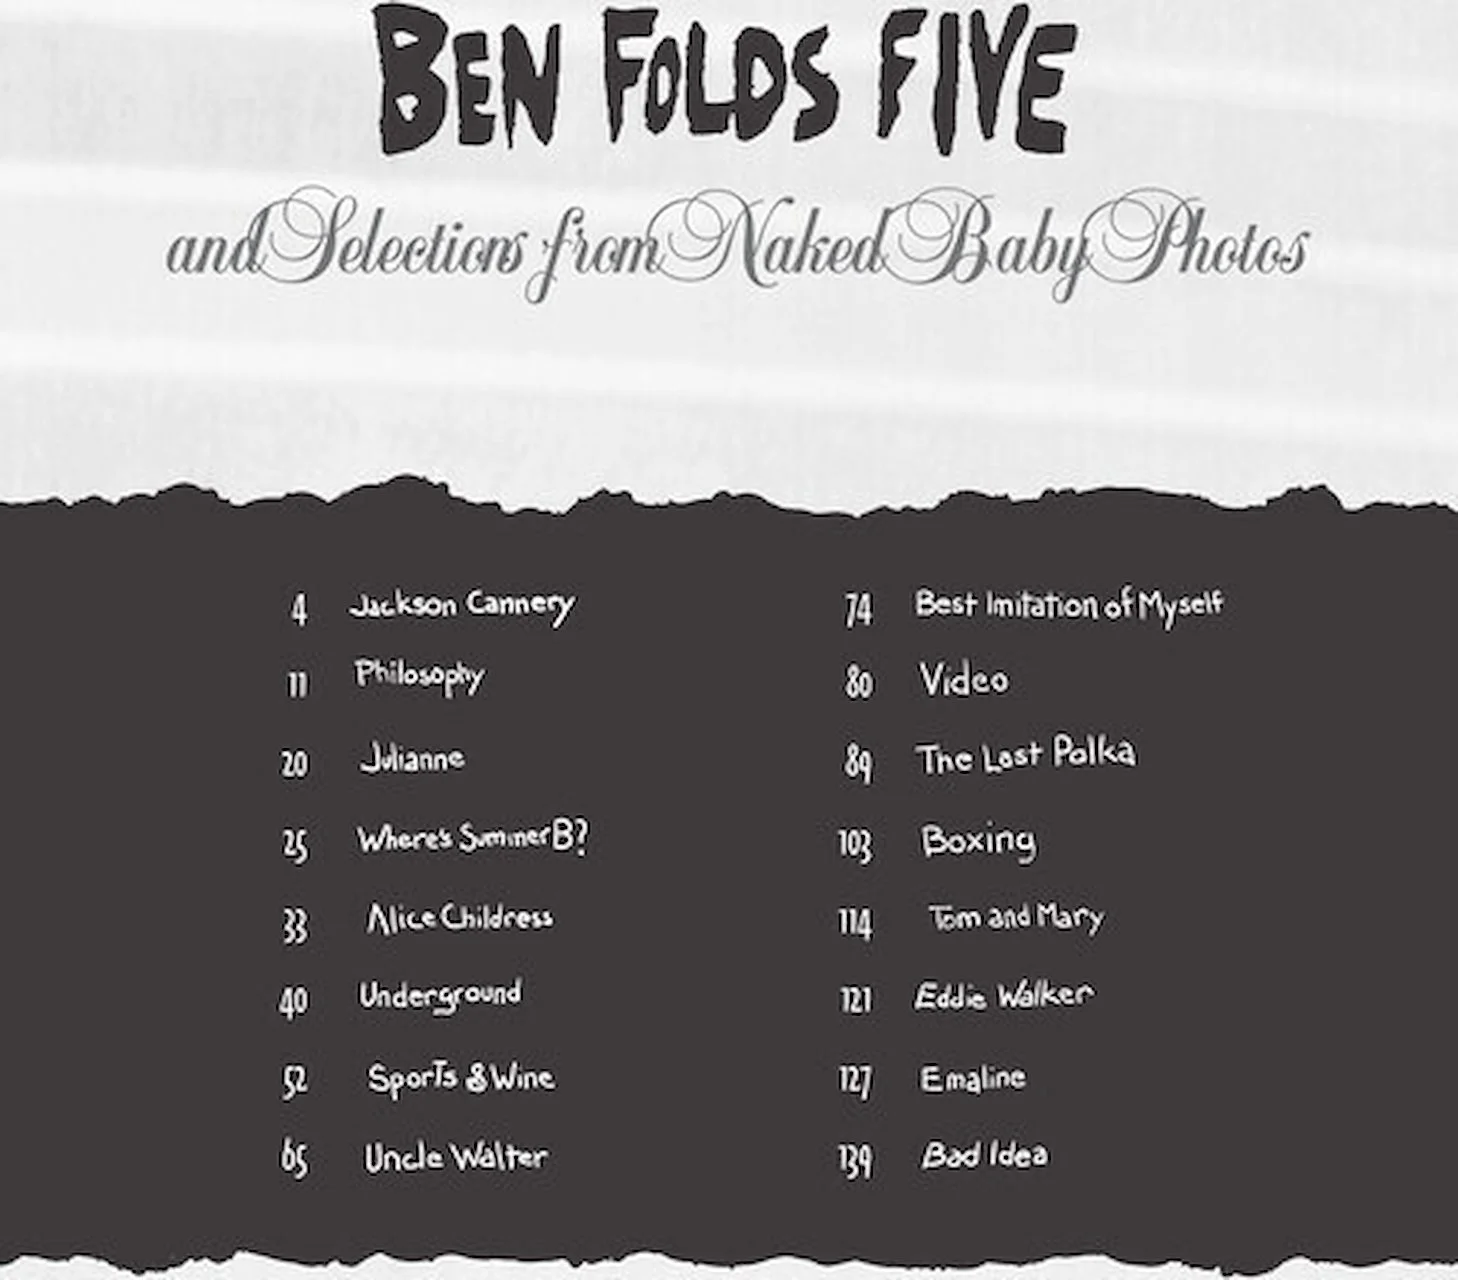 Ben Folds Five and Selections from Naked Baby Photos | Capital Music Gear